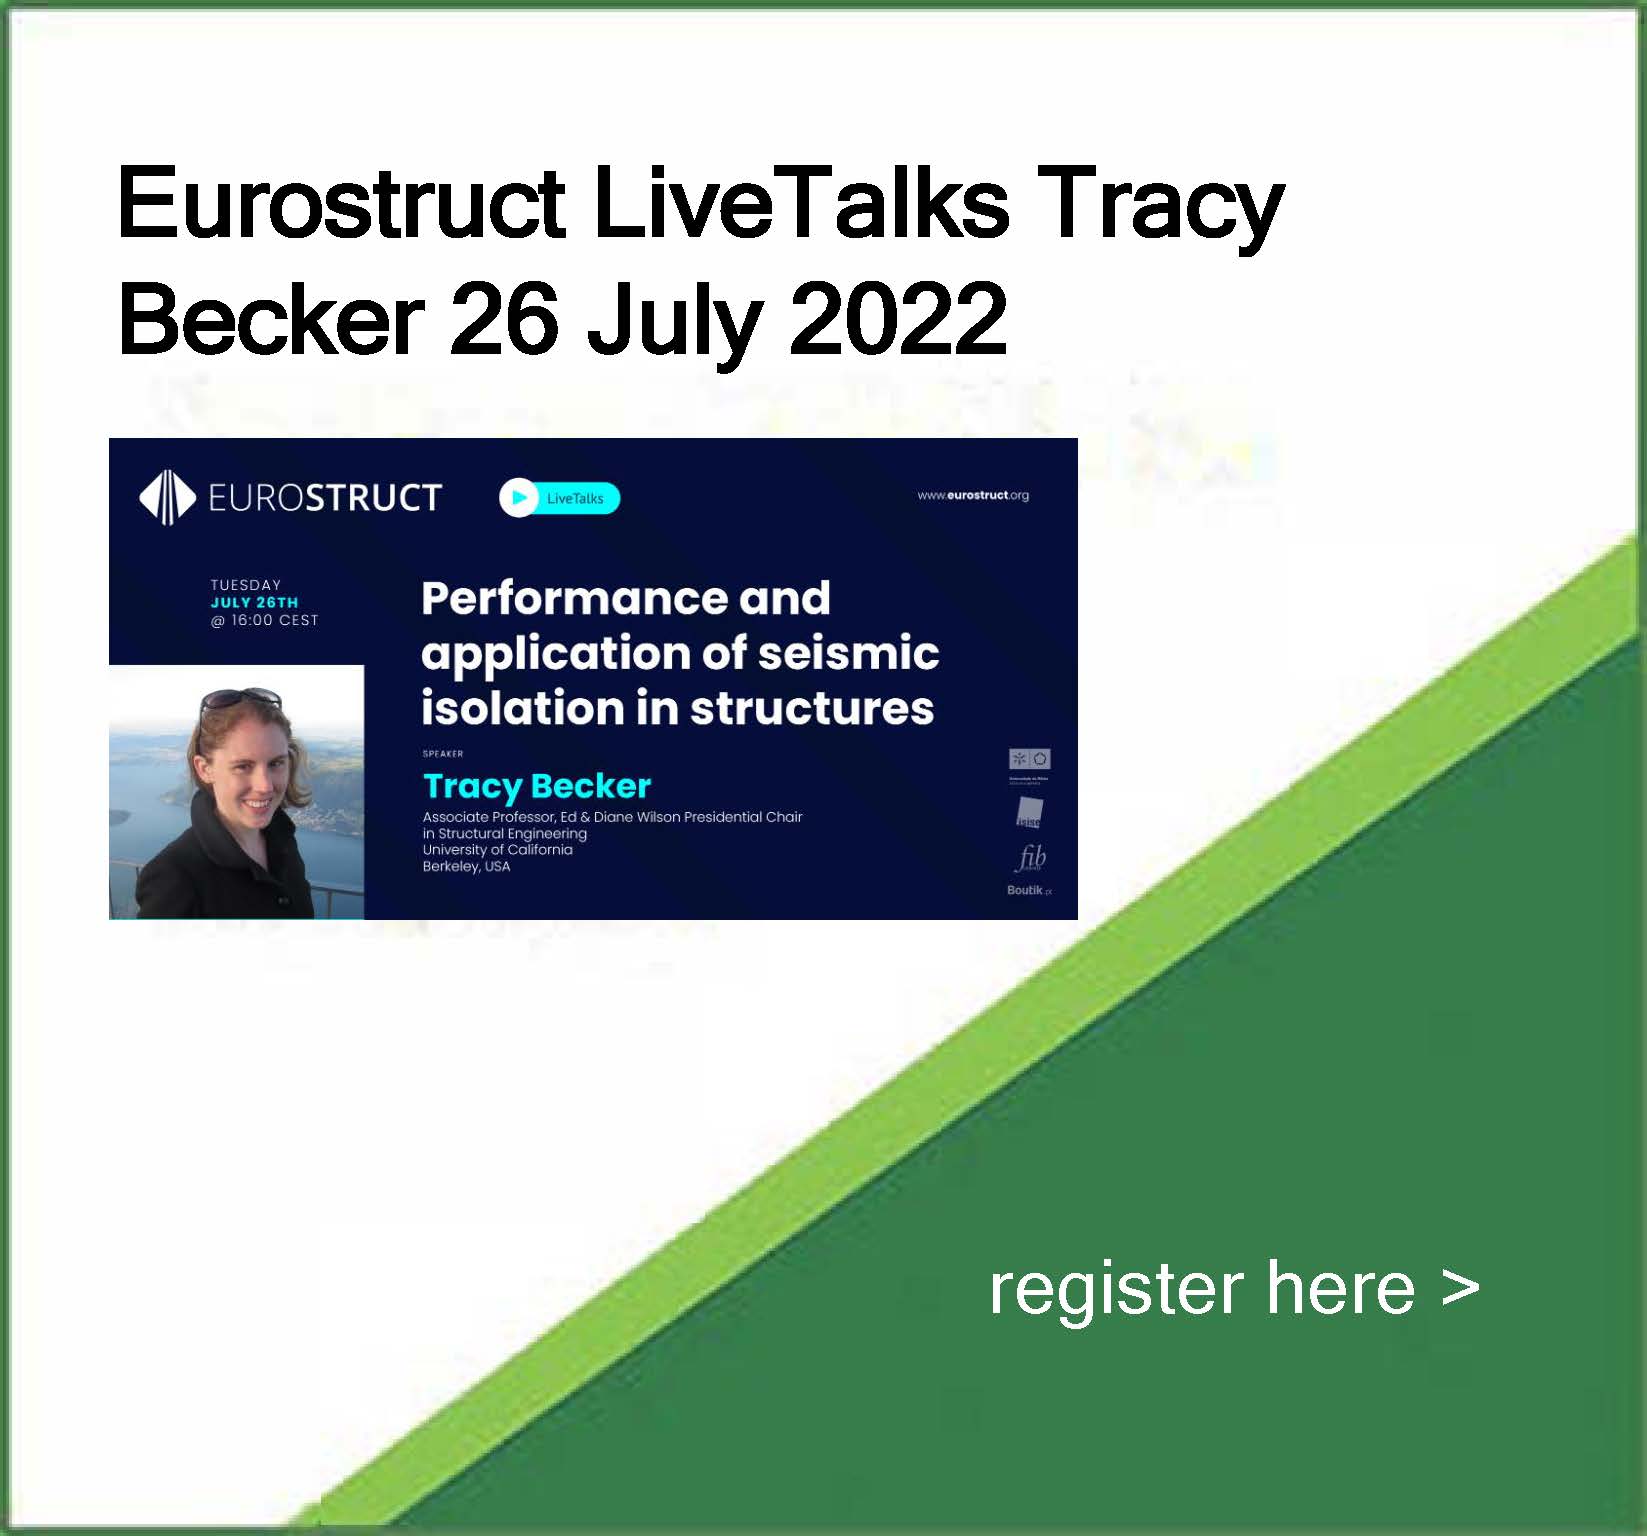 LiveTalk “Performance and application of seismic isolation in structures”  26th July 2022 at 16:00 CEST